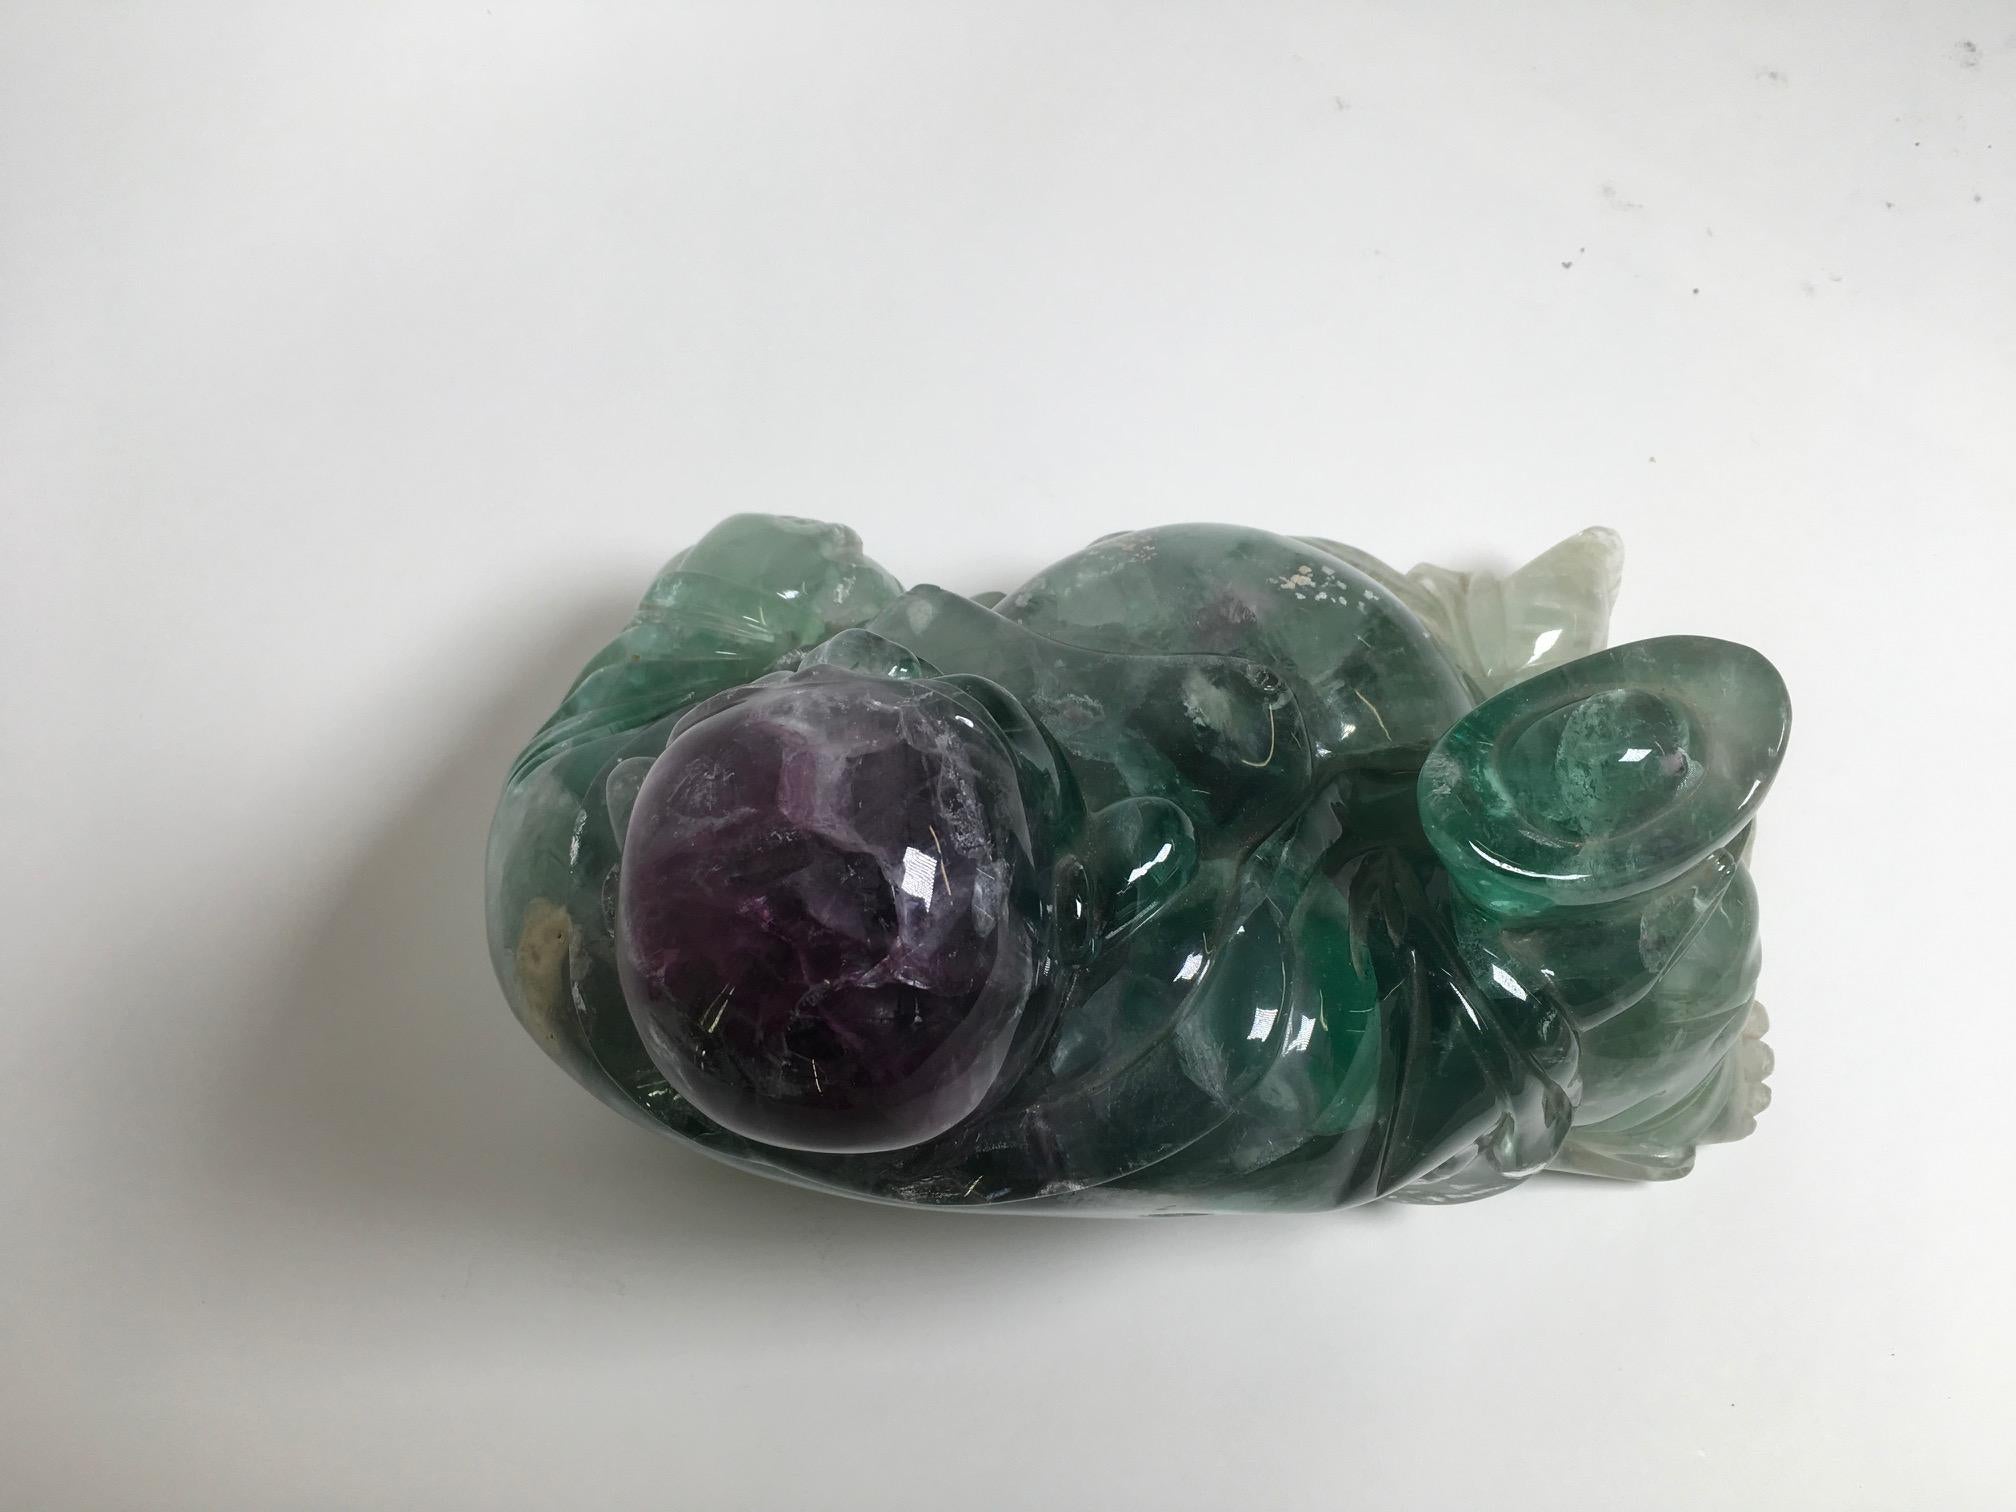 Chinese Beautiful Carved Fluorite Sculpture For Sale